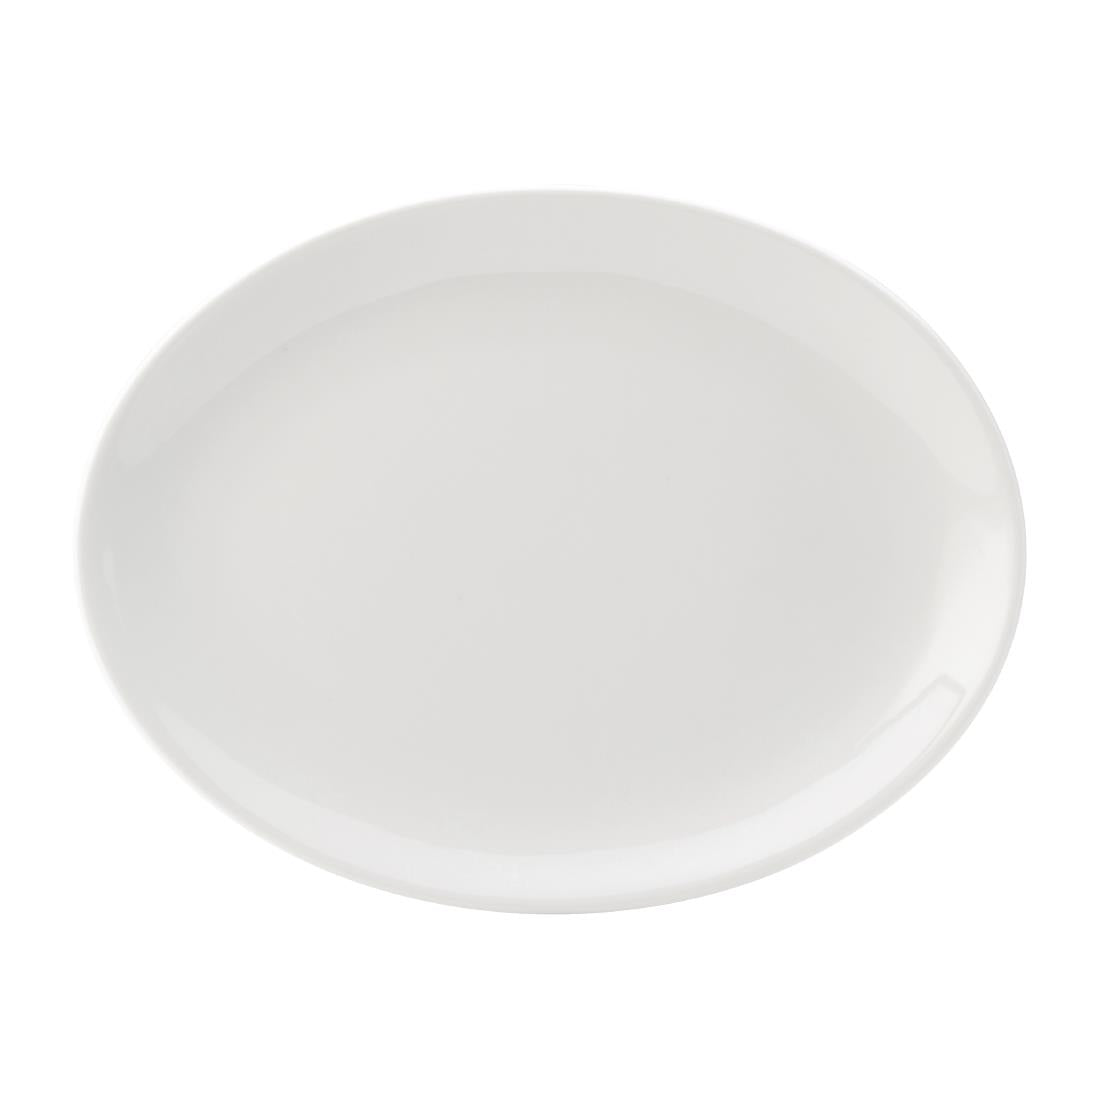 DY323 Utopia Titan Oval Plates White 210mm (Pack of 24)